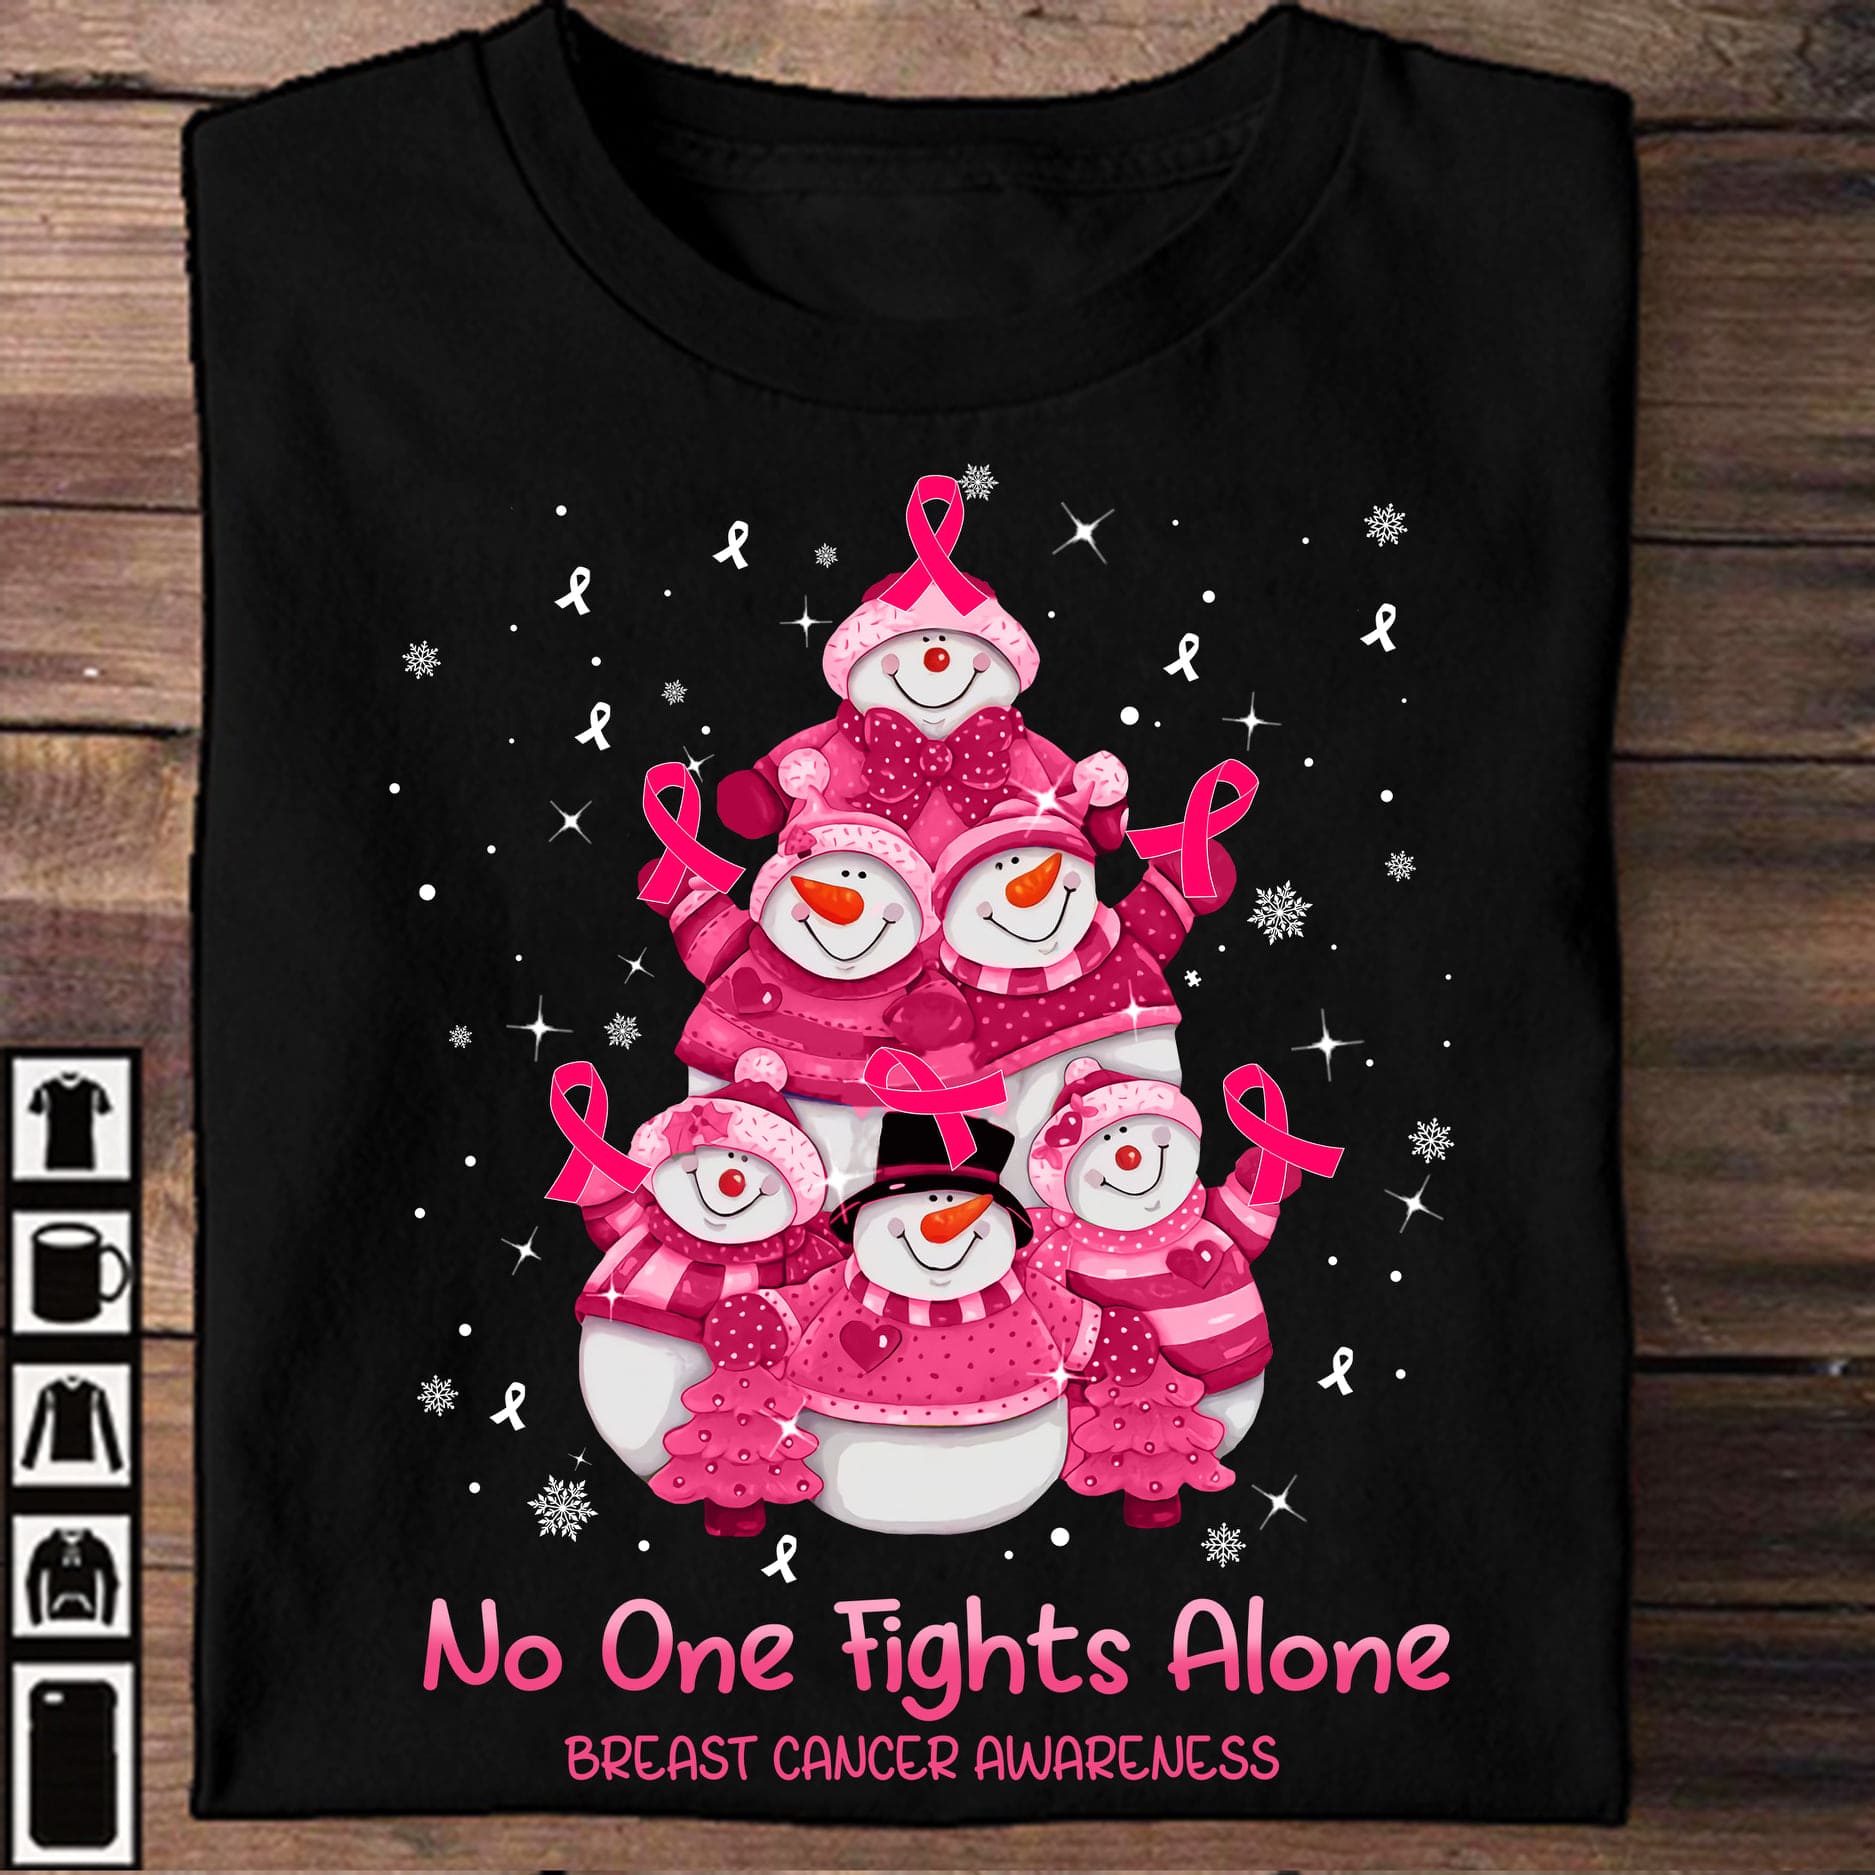 No one fights alone - Breast cancer awareness, Christmas gorgeous snowman